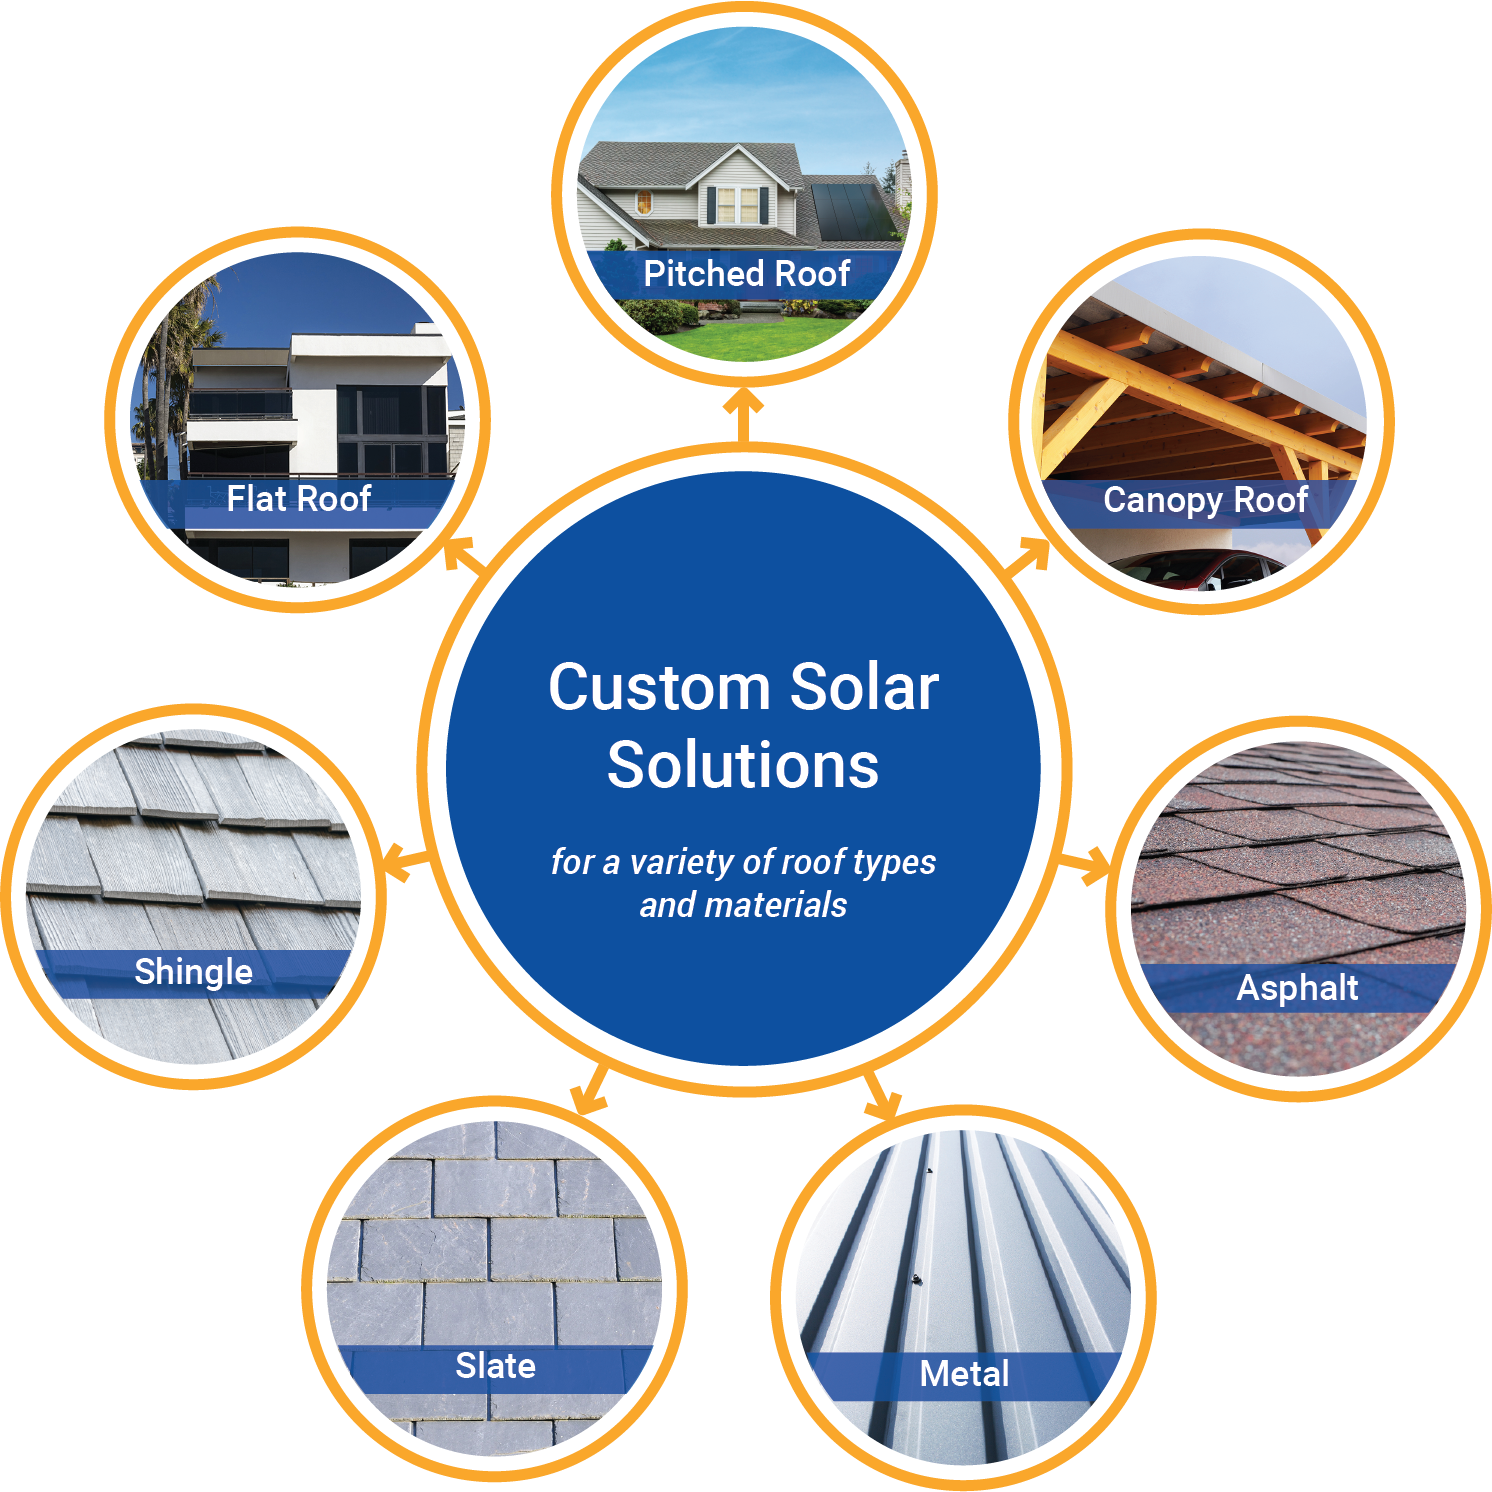 Custom solar solutions for pitched, canopy, flat, clay, asphalt, slate, and metal roofs